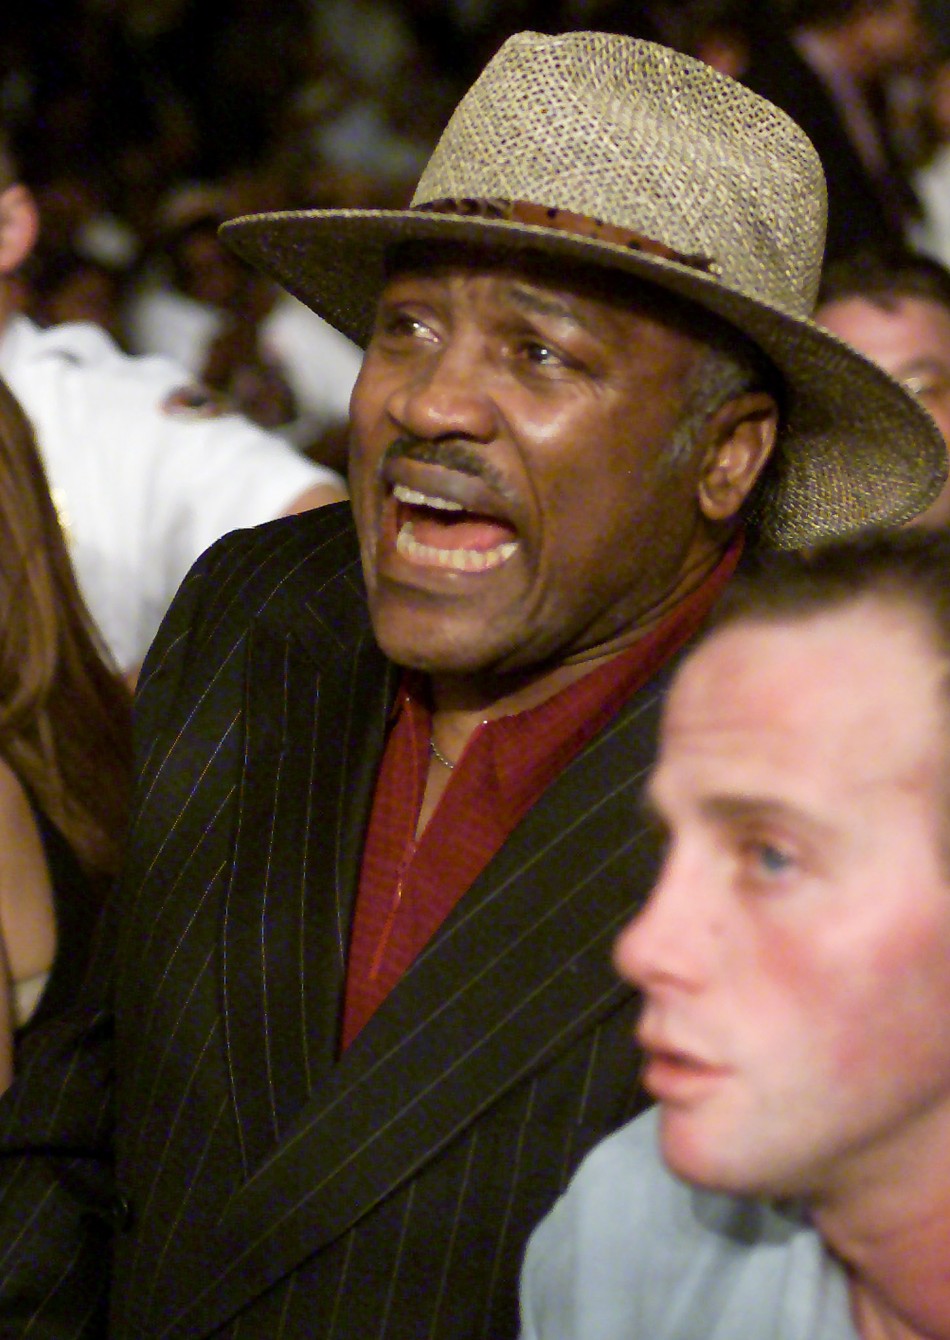 Joe Frazier cheers for his 39-year-old daughter Jacqui during her fight against Laila Ali, the 23-year-old daughter of boxing legend Muhammad Ali.